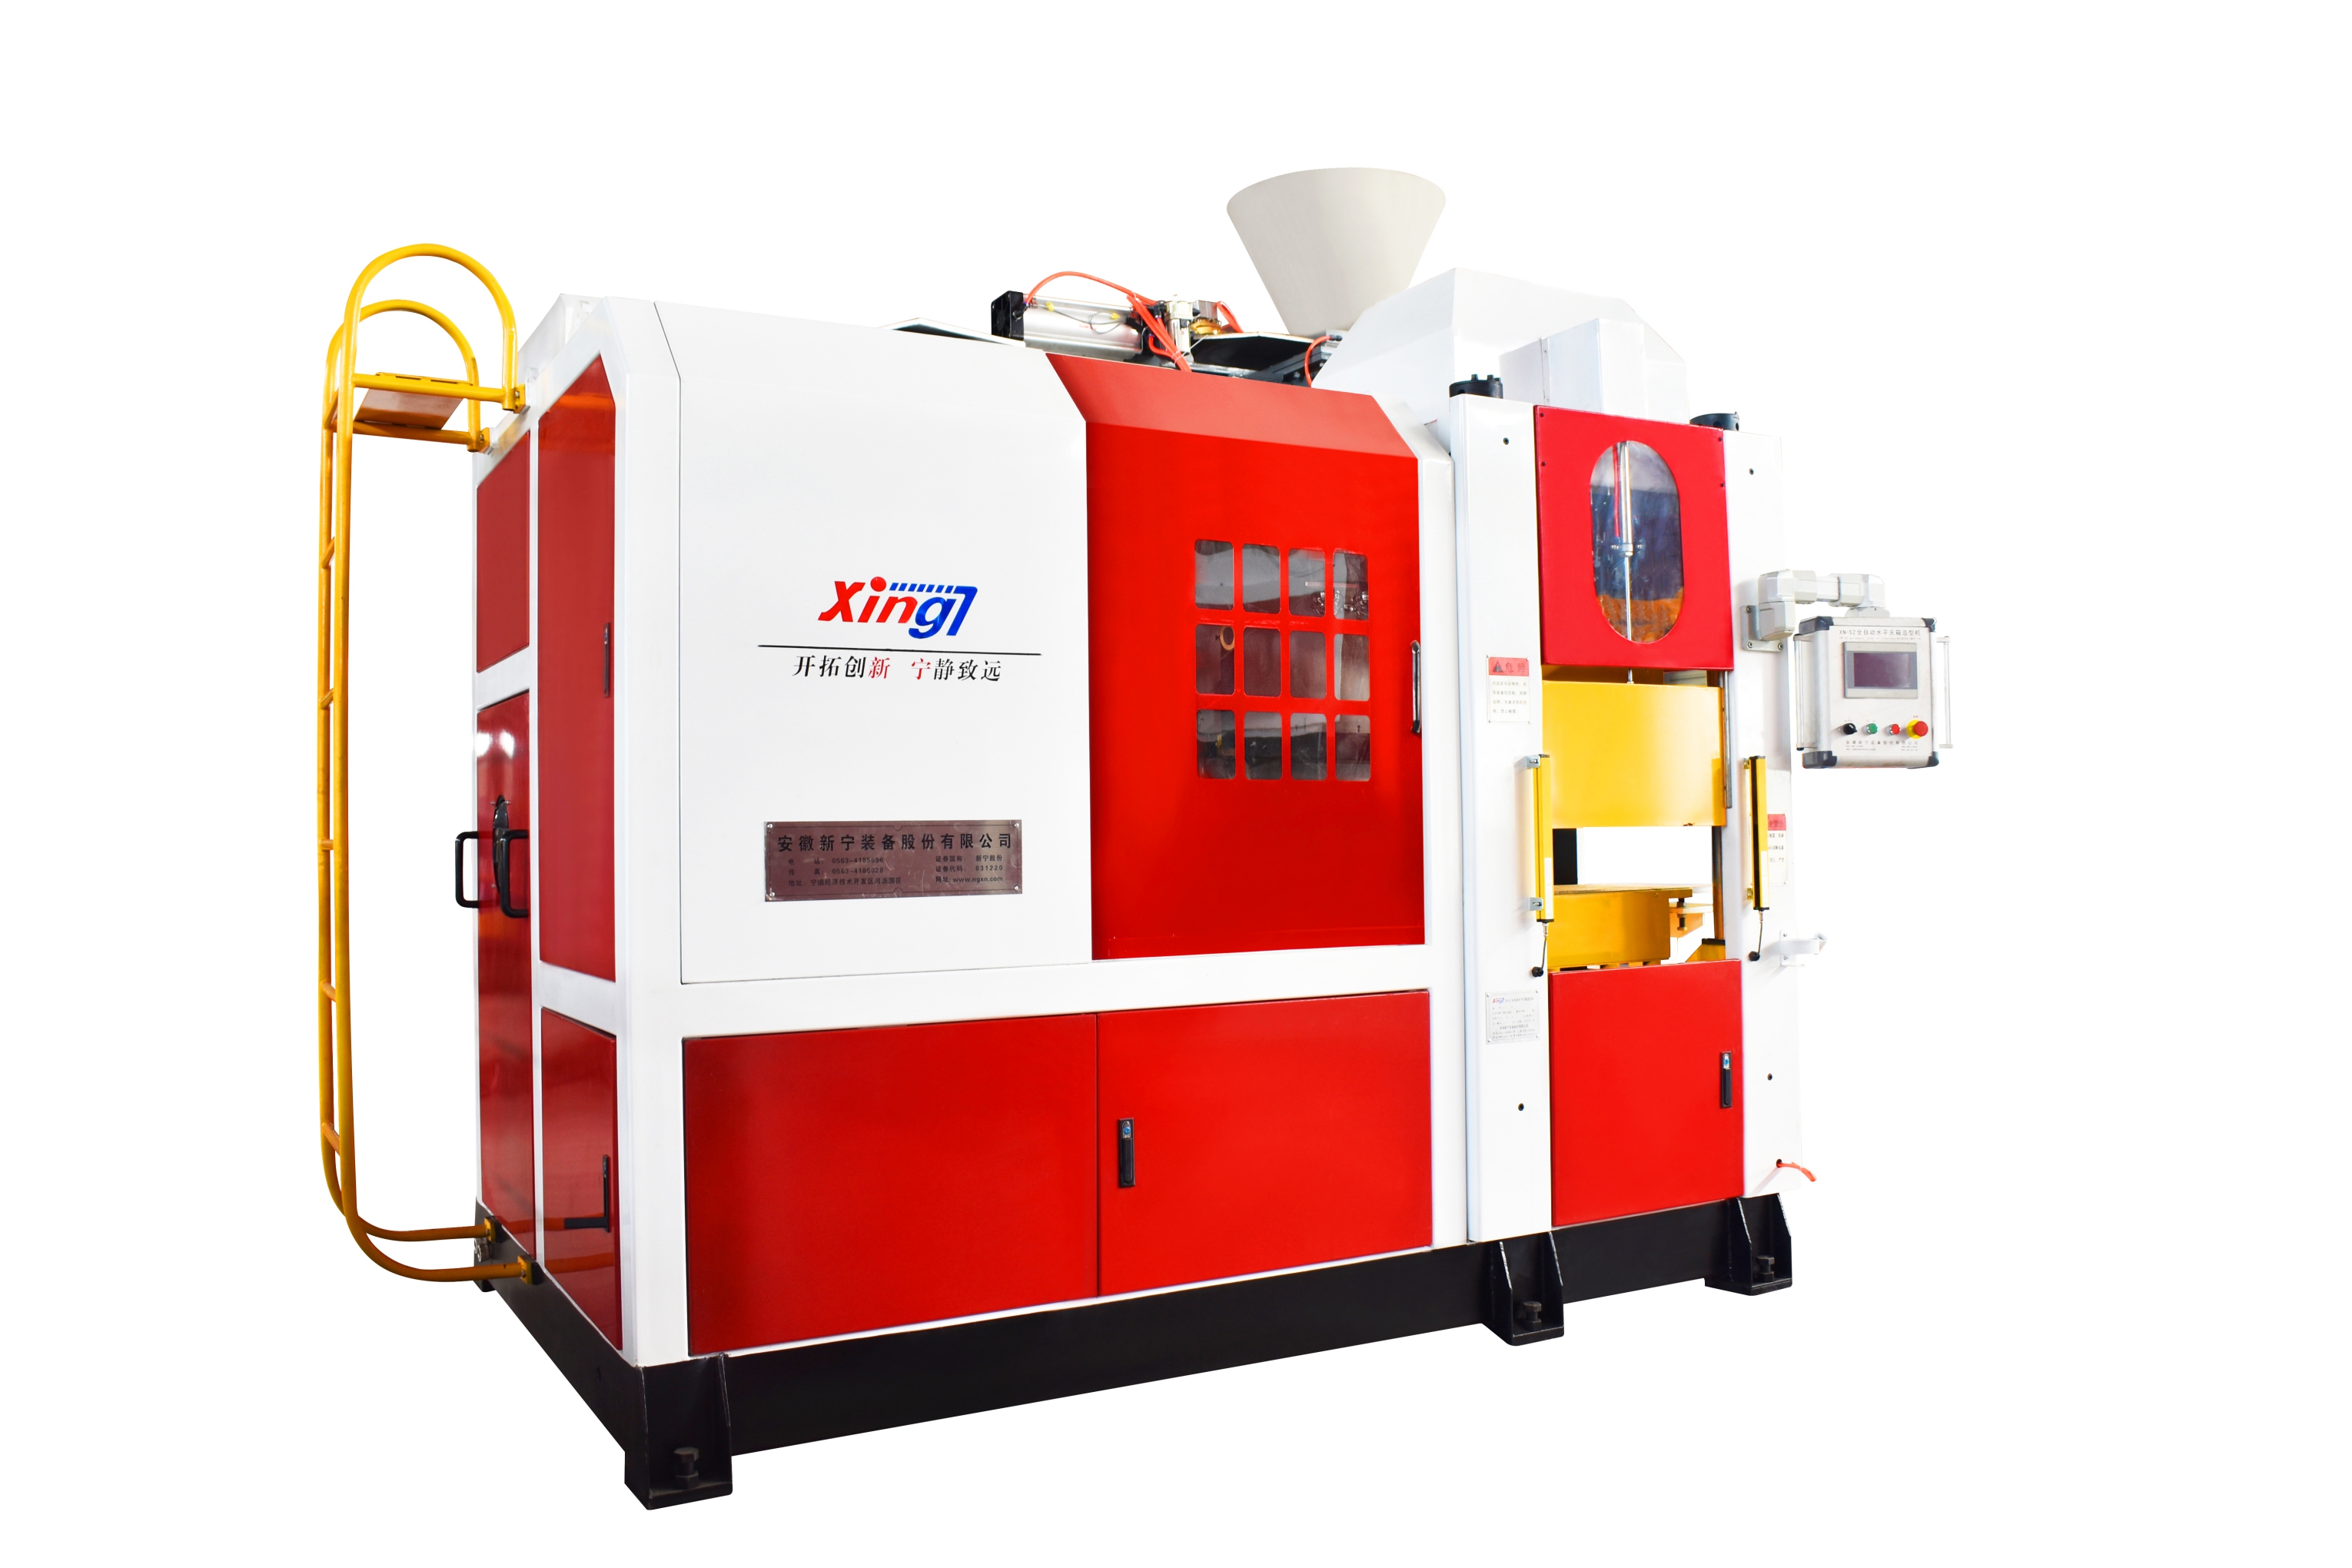 Automatic resin sand or clay sand flask less casting molding foundry plant machine used casting molding line